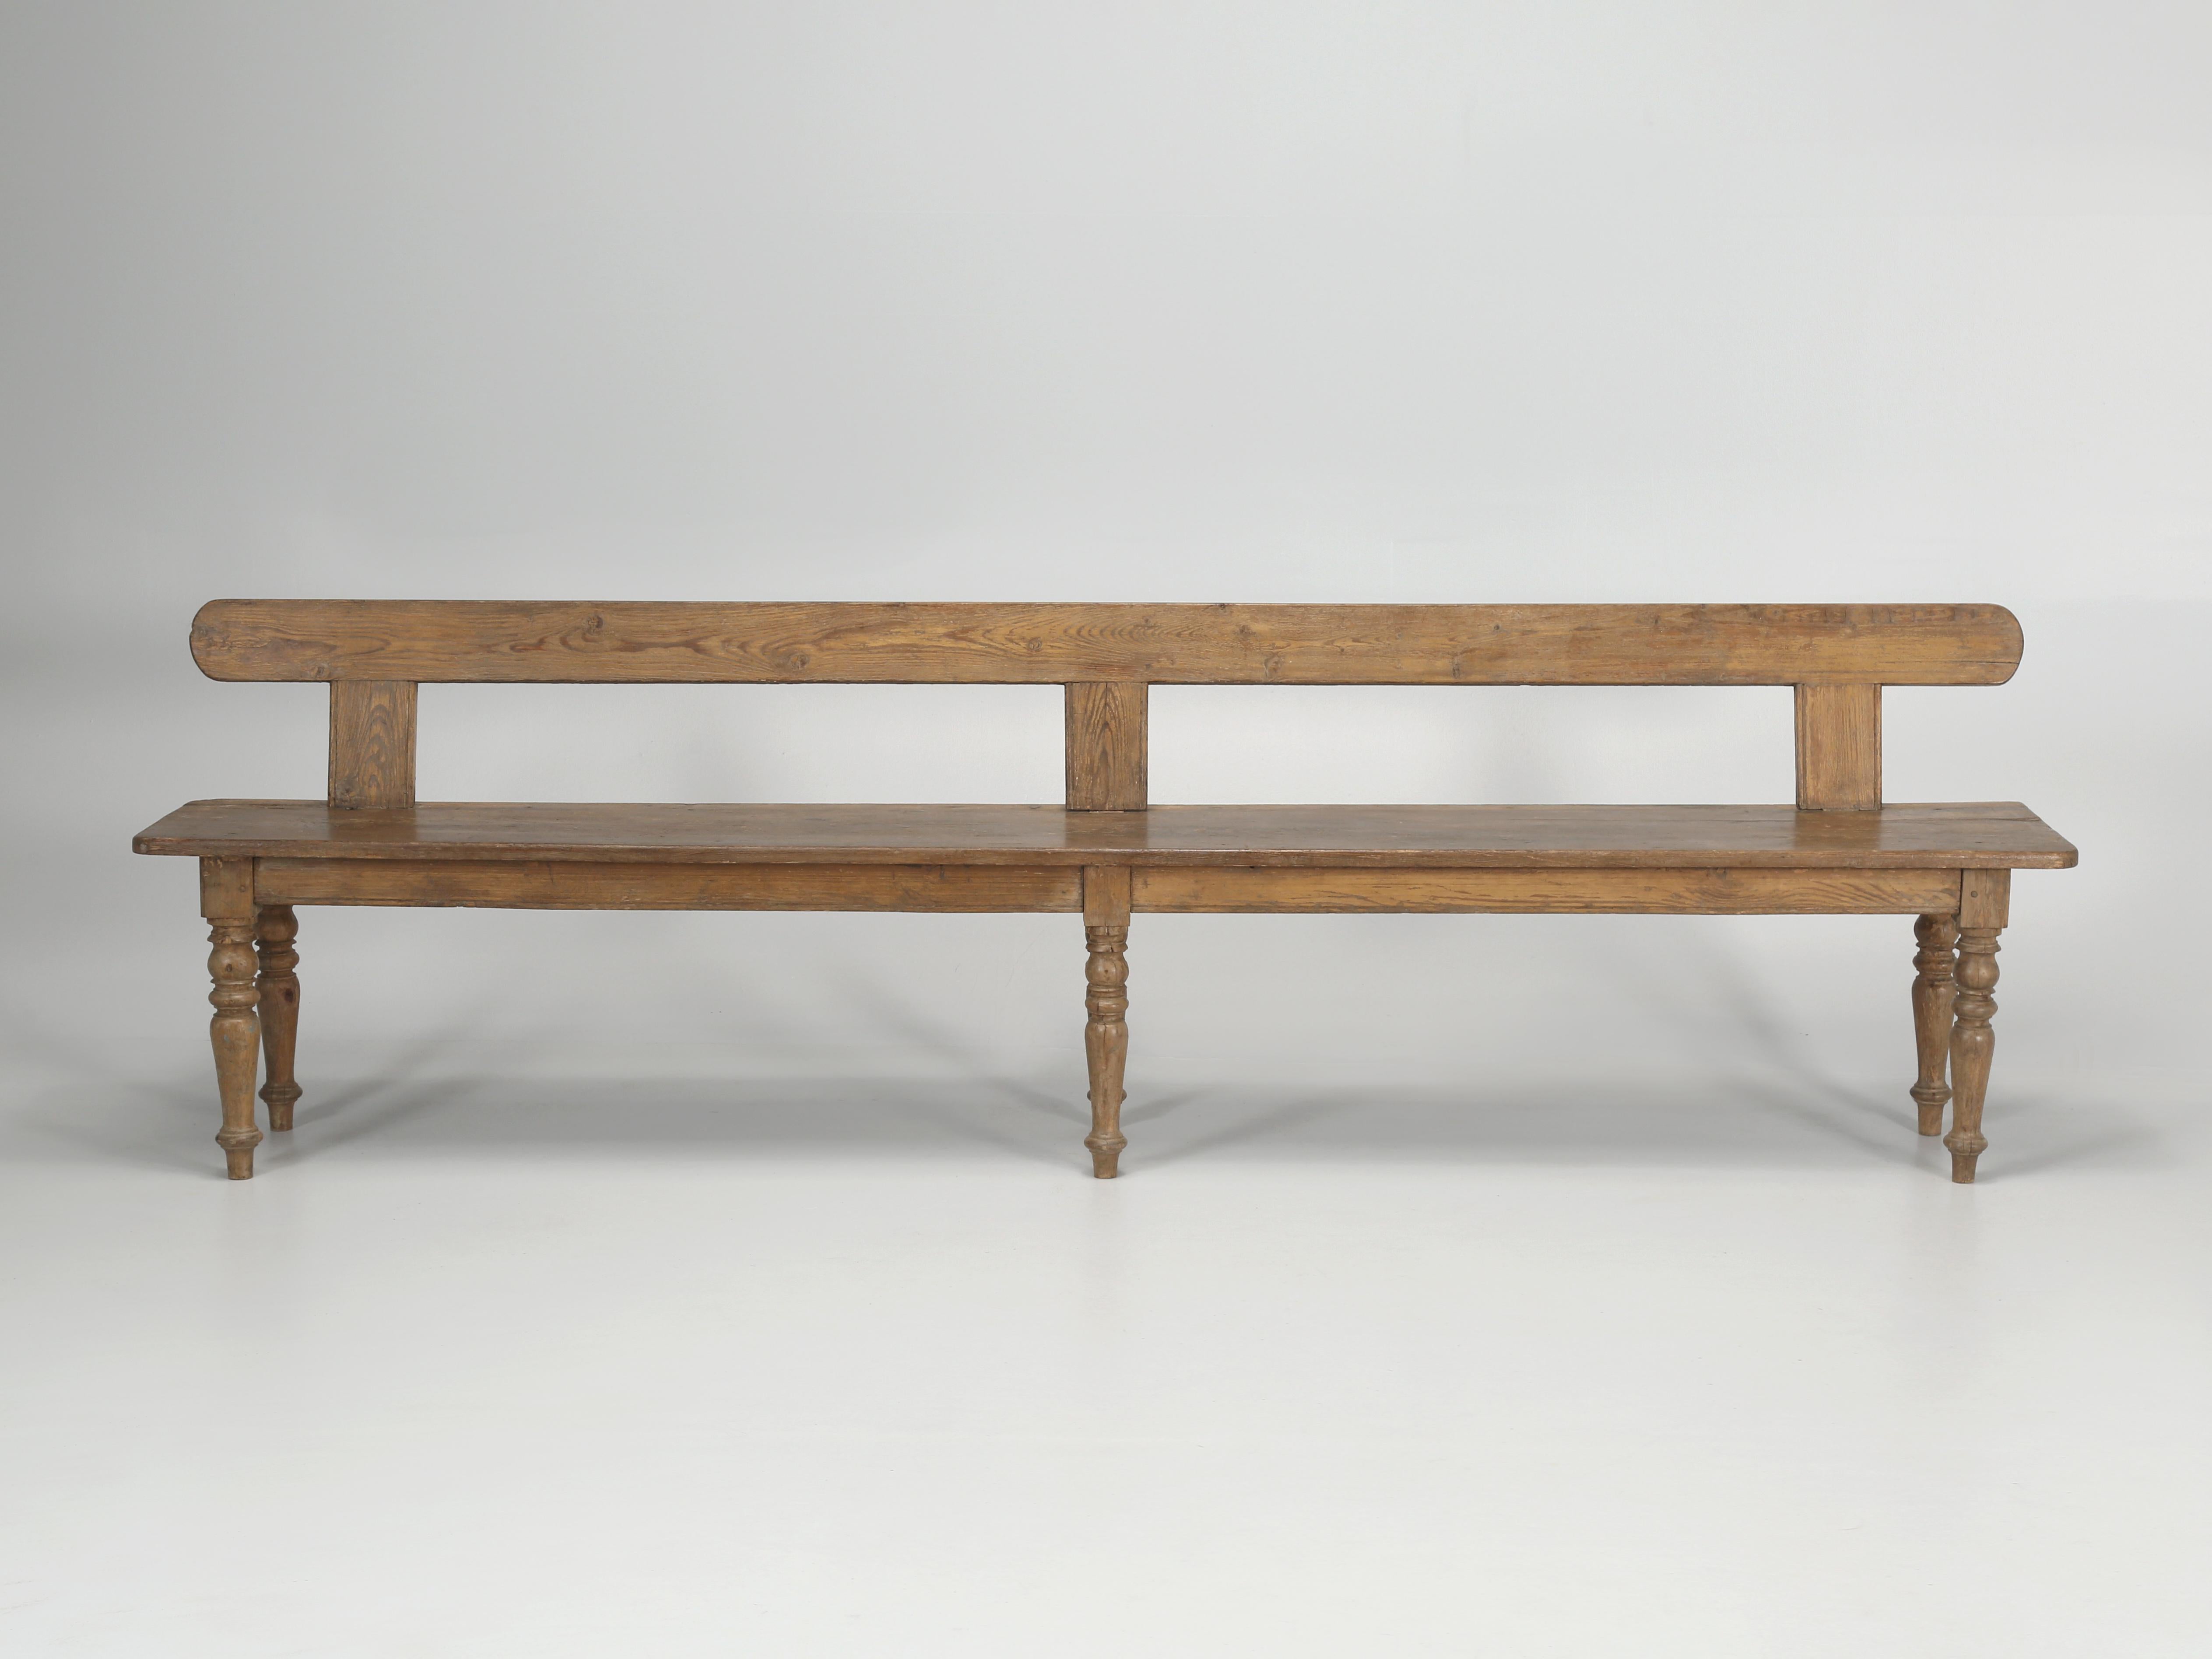 Hand-Crafted Antique English Oak Bench Comfortable Great Patina Original Finish Late 1800's